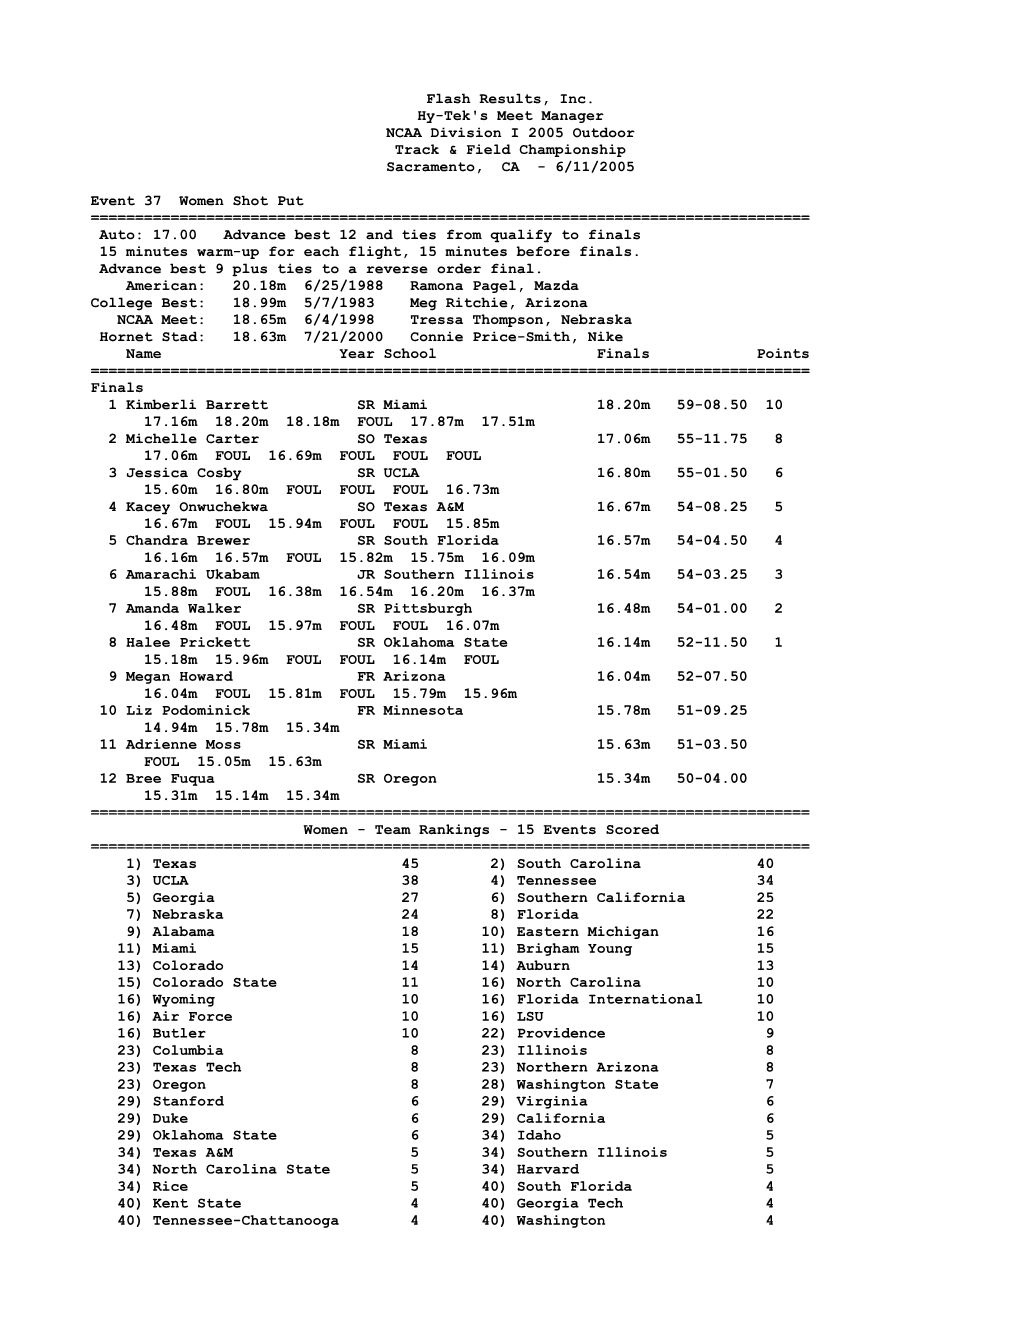 Flash Results, Inc. Hy-Tek's Meet Manager NCAA Division I 2005 Outdoor Track & Field Championship Sacramento, CA - 6/11/2005